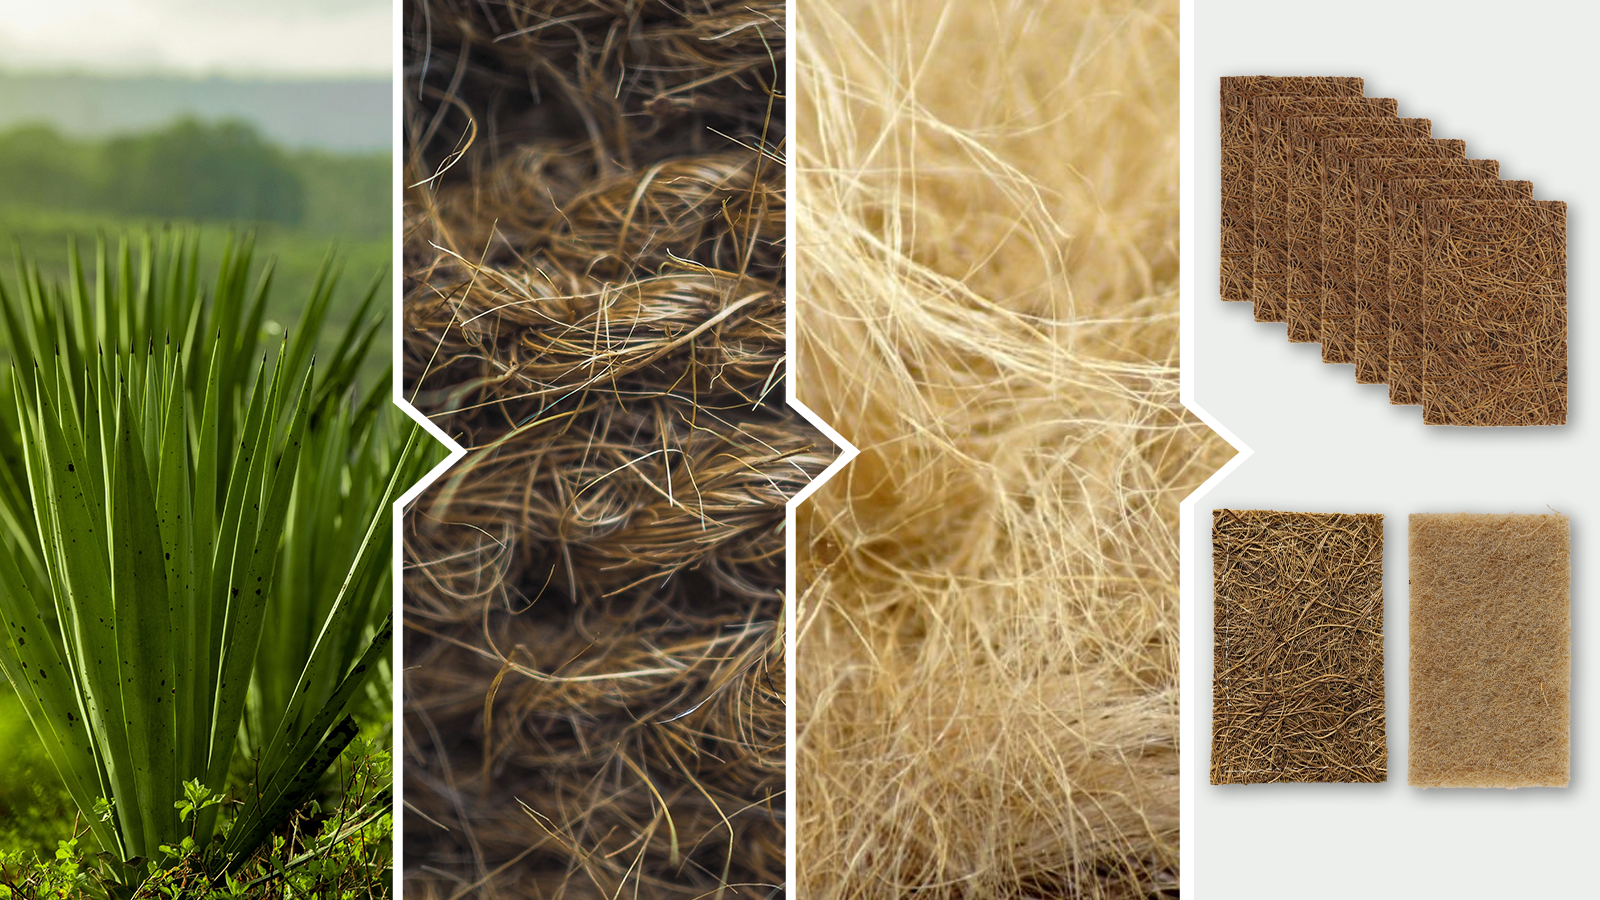 Sisal is a natural fiber extracted from the agave plant.